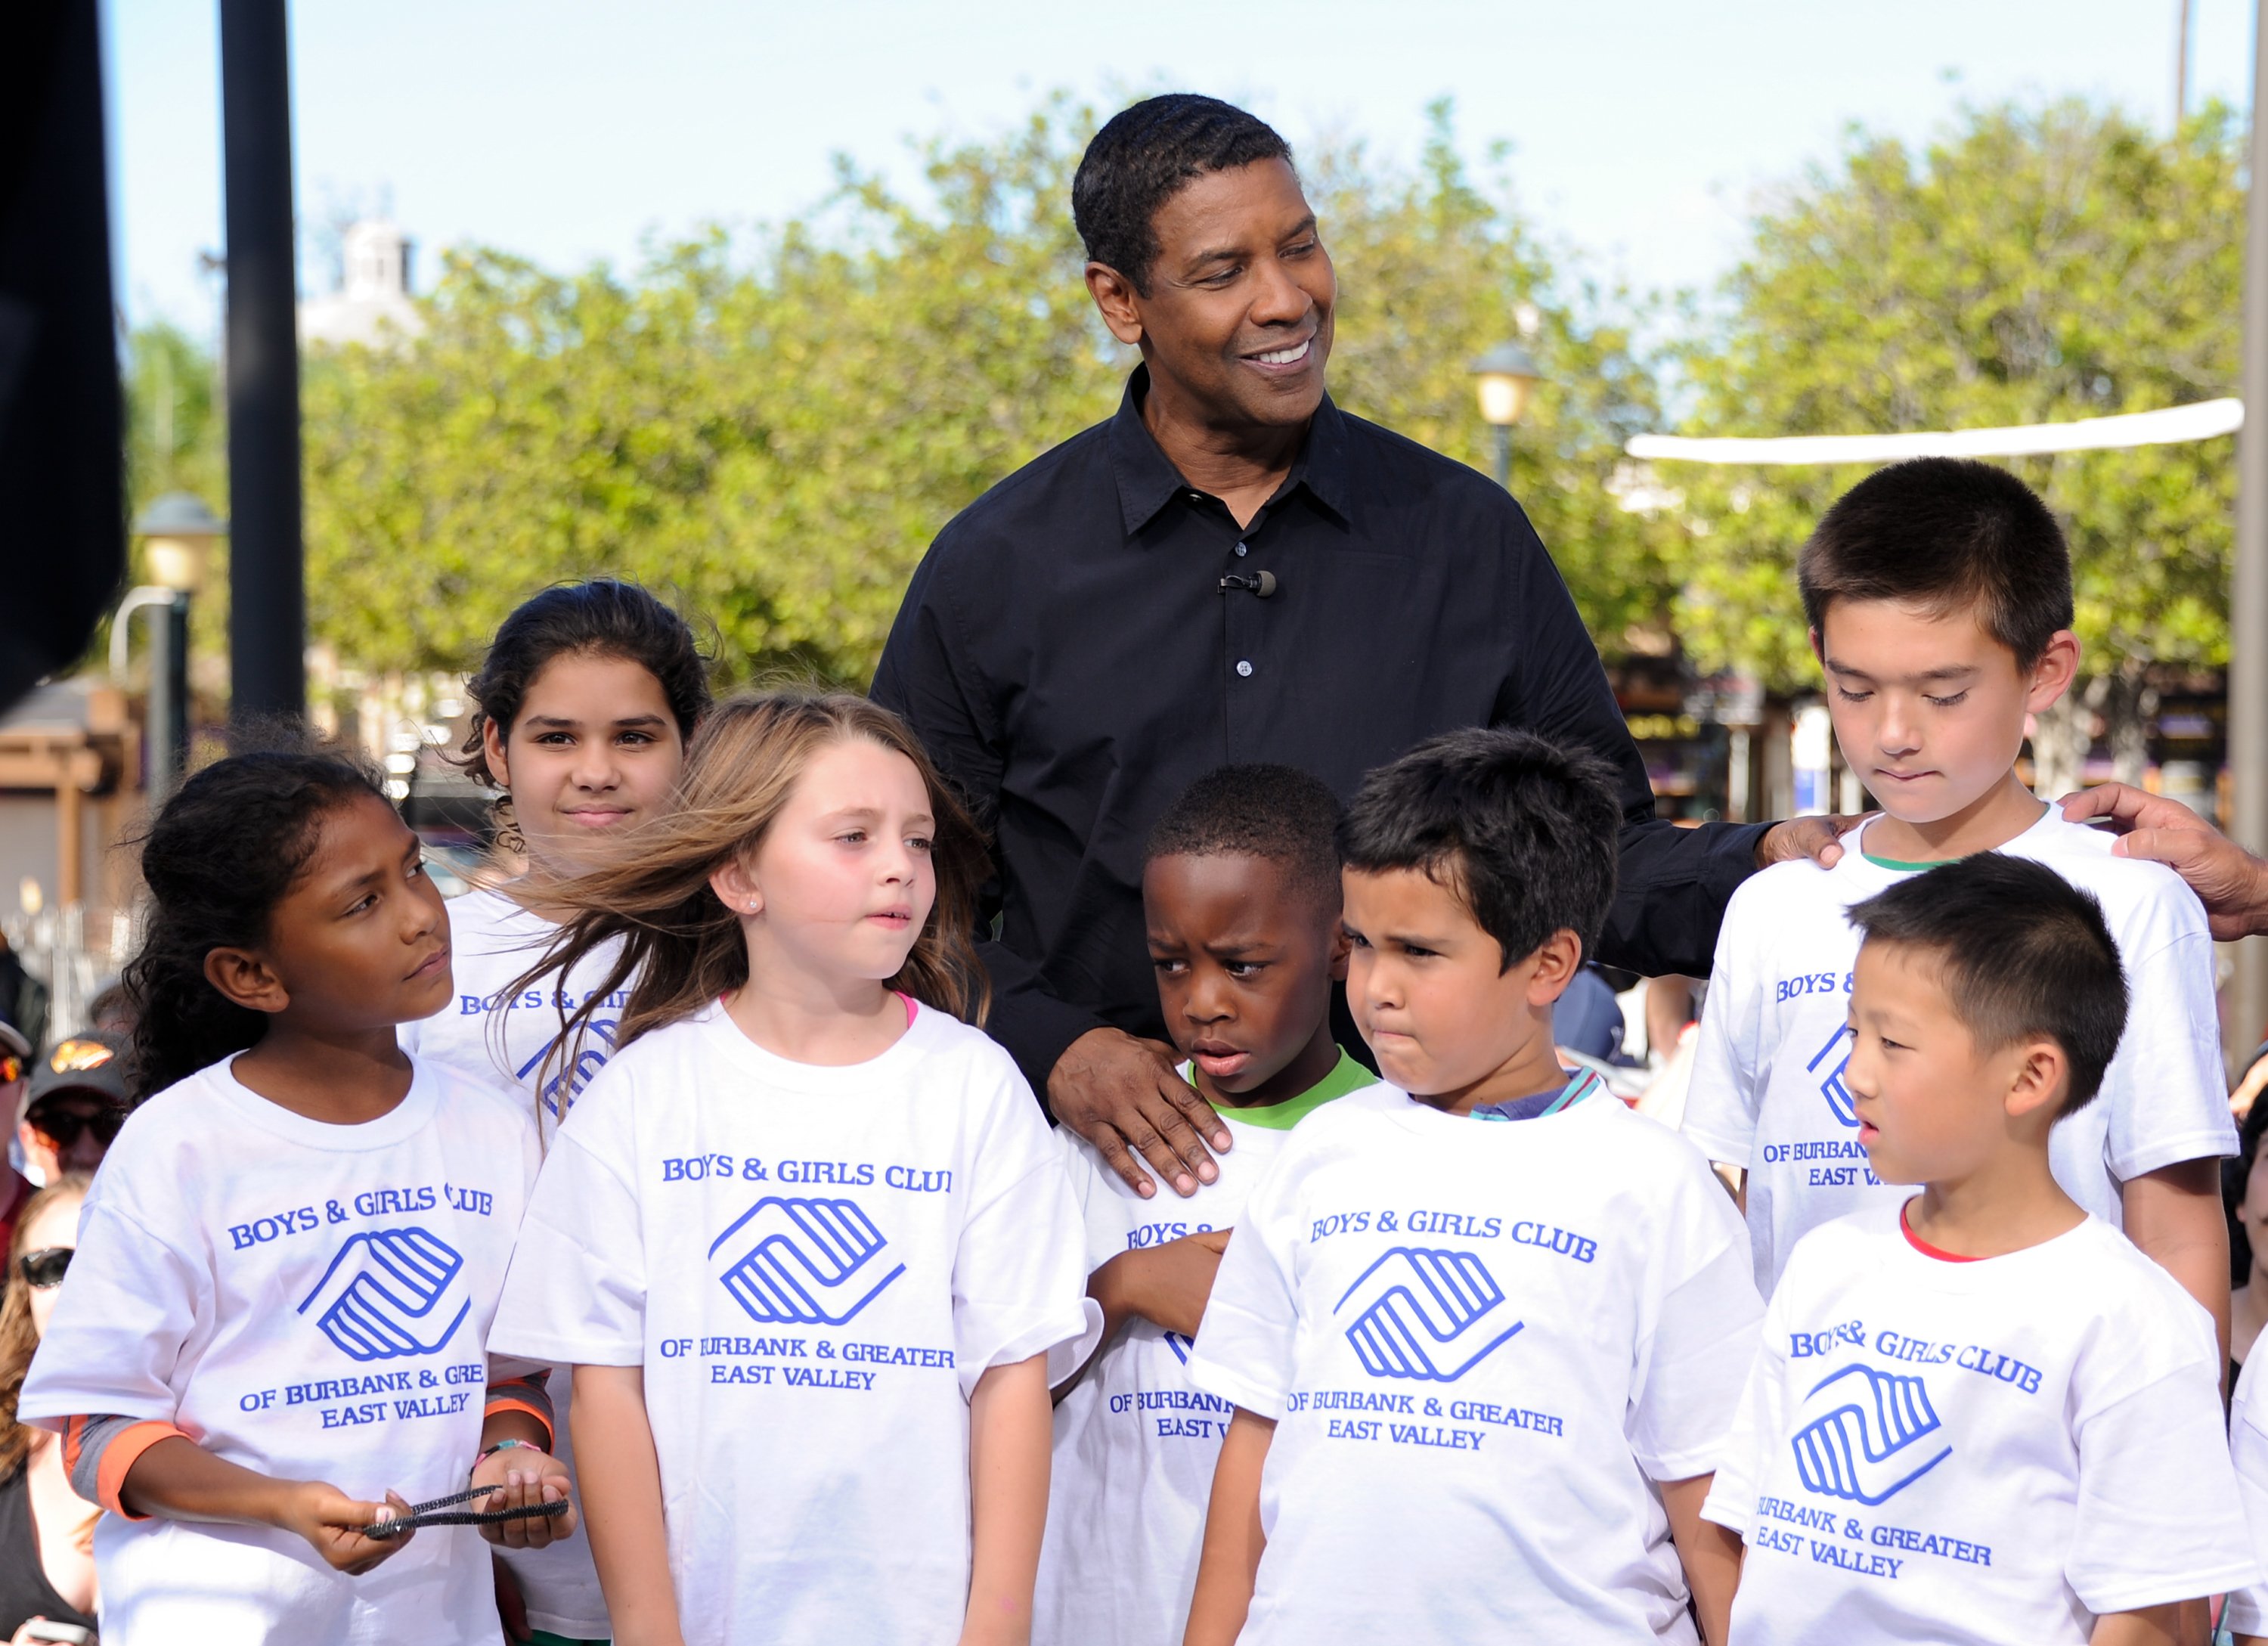  Denzel Washington poses with children from the Boys and Girls Club "Extra" at Universal Studios Hollywood on September 25, 2014 in Universal City, California. | Source: Getty Images